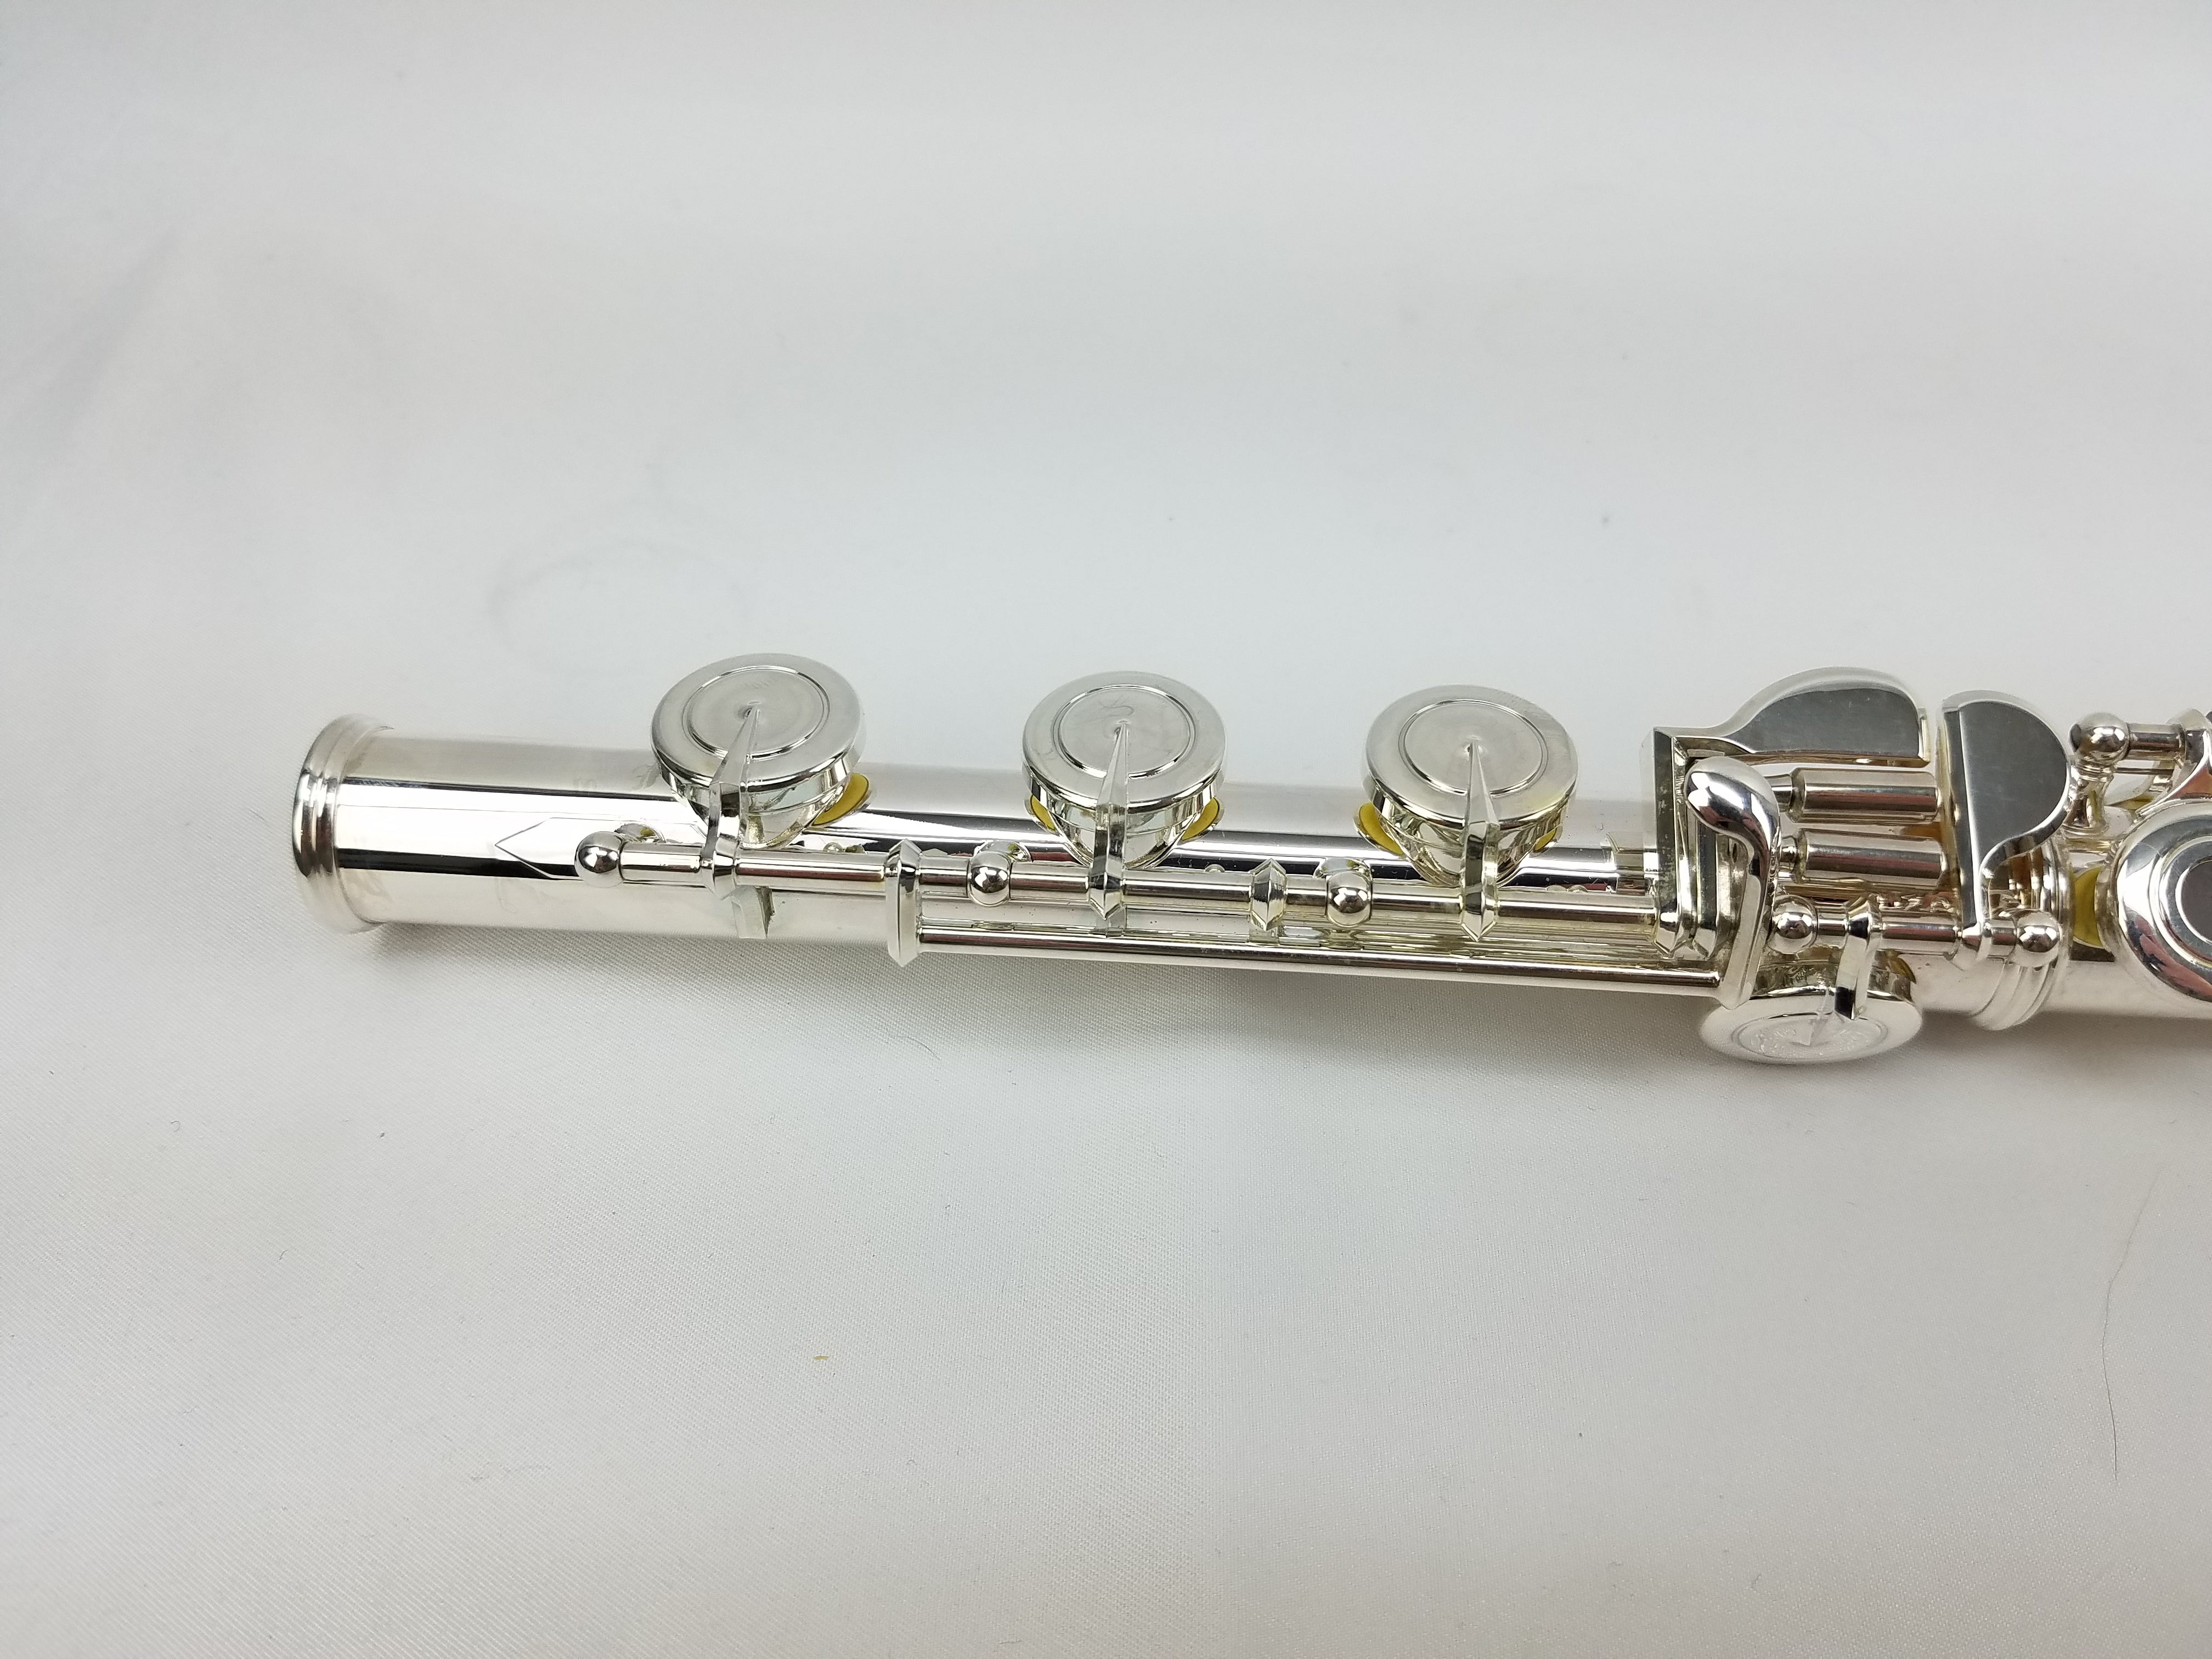 North Bridge NB500 Open-Hole Flute with Solid Silver Headjoint, Point Brace Arms